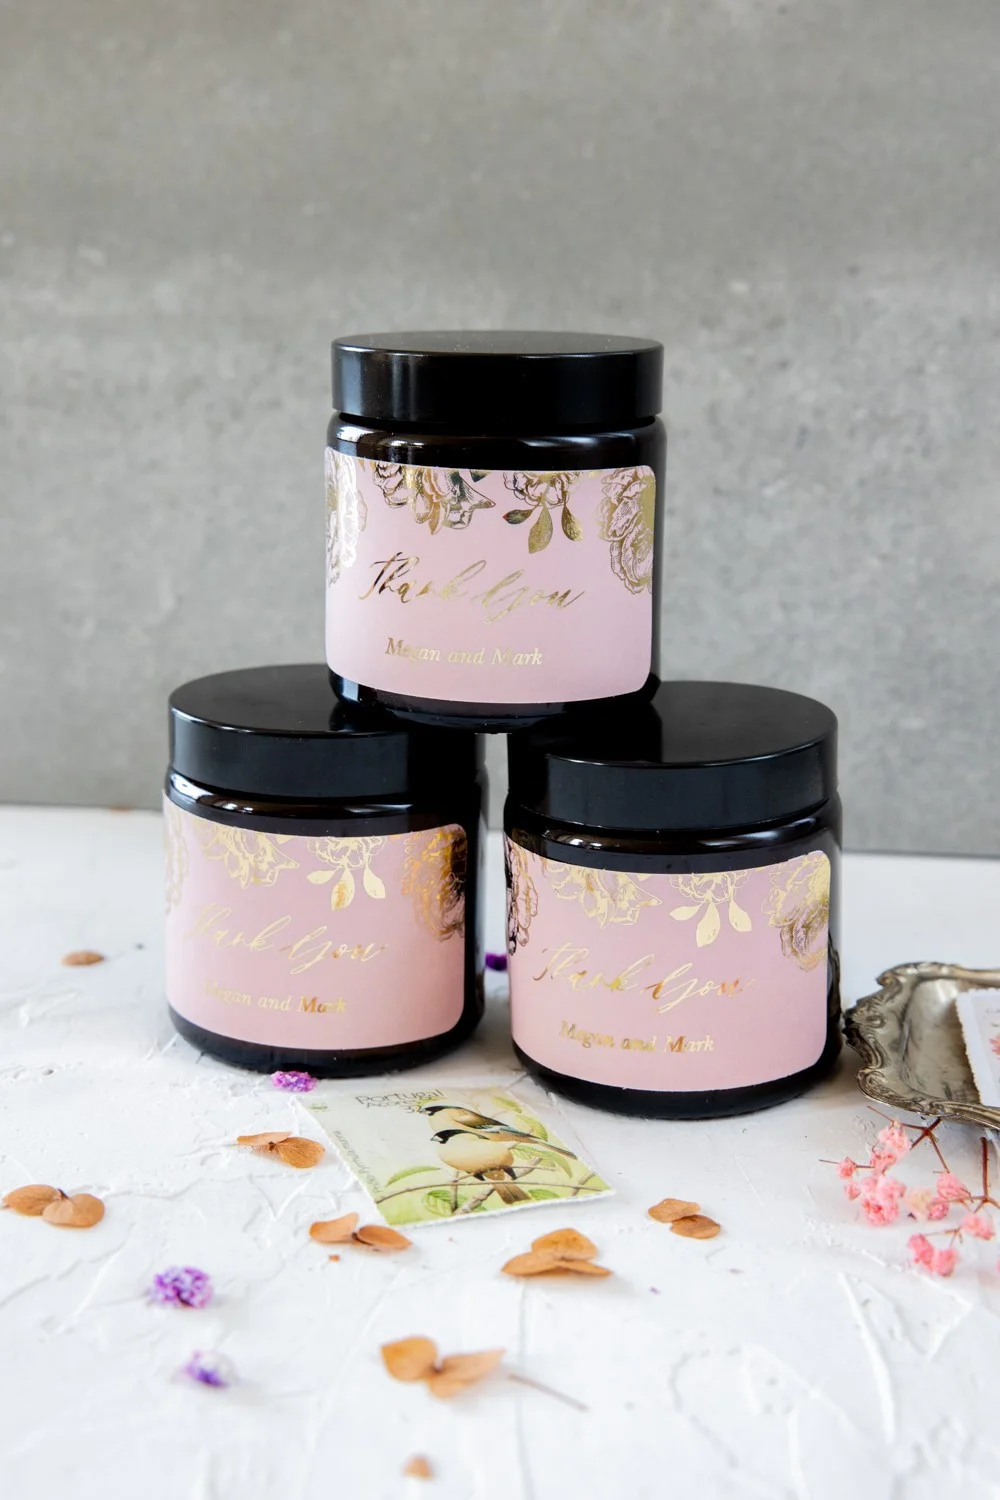 Soy Wax Wedding Favors - Blush Pink, Handmade Glass Jar Candle with Gold Text and Flowers - Model S13